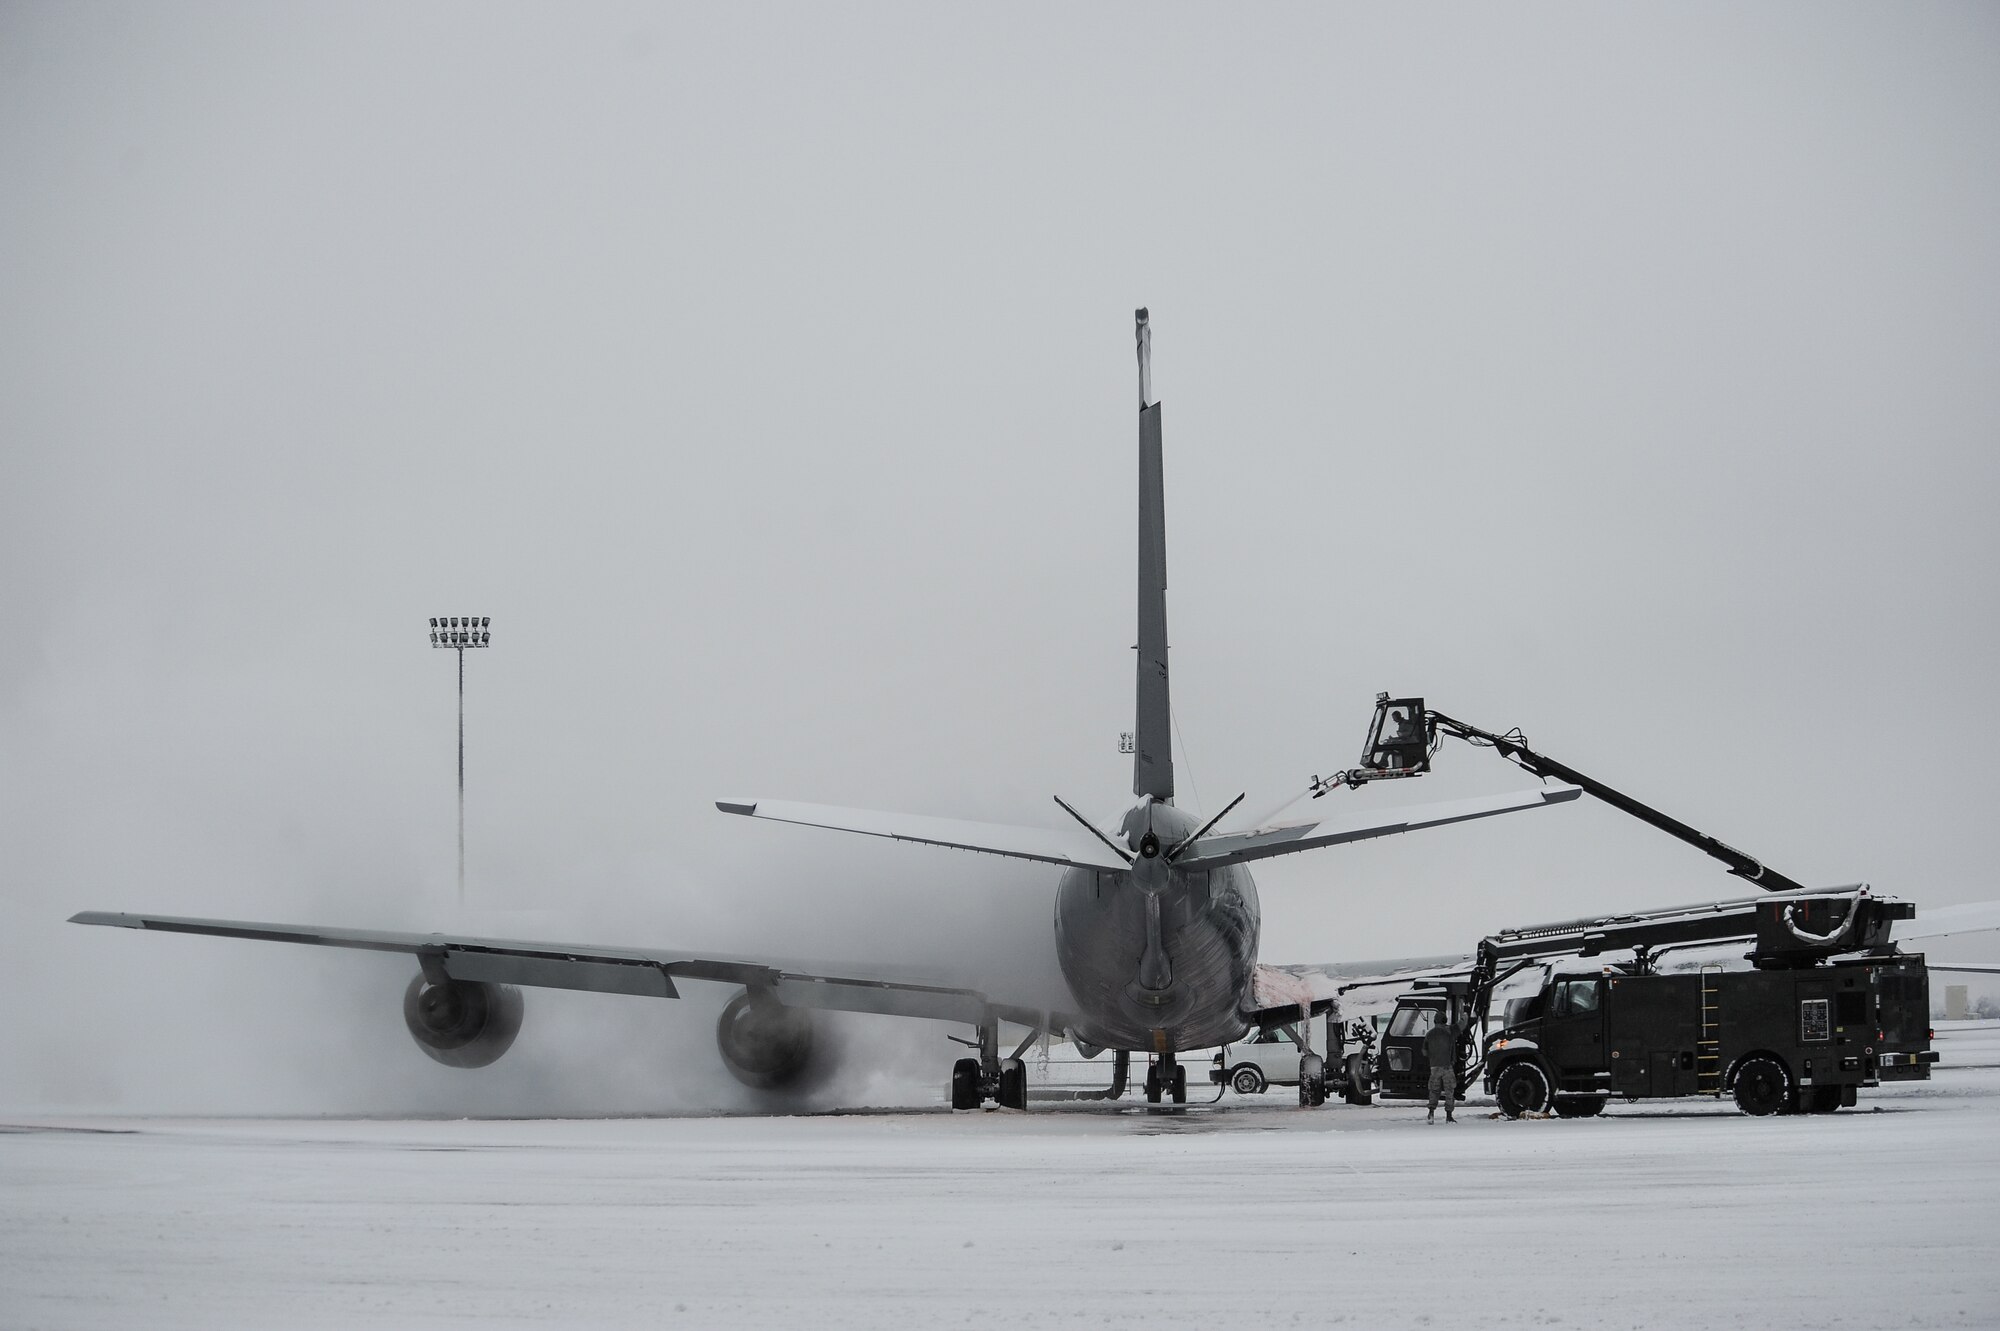 92nd Aircraft Maintenance Squadron Airmen work together to de-ice a KC-135 Stratotanker on the flight line for flight preparation at Fairchild Air Force Base, Wash., Jan. 29, 2014. Aircraft de-icing is a process in which liquid solutions are sprayed onto an aircraft during the winter to both defrost and prevent future precipitation from freezing. Snow and ice on the wings and rear tail component change their shape and disrupt the airflow making it difficult to fly and diminishes fuel economy. The recently installed deicing simulator allows Airmen to train deicing an aircraft without using costly deicing resources and equipment. (U.S. Air Force photo/Staff Sgt. Alexandre Montes)